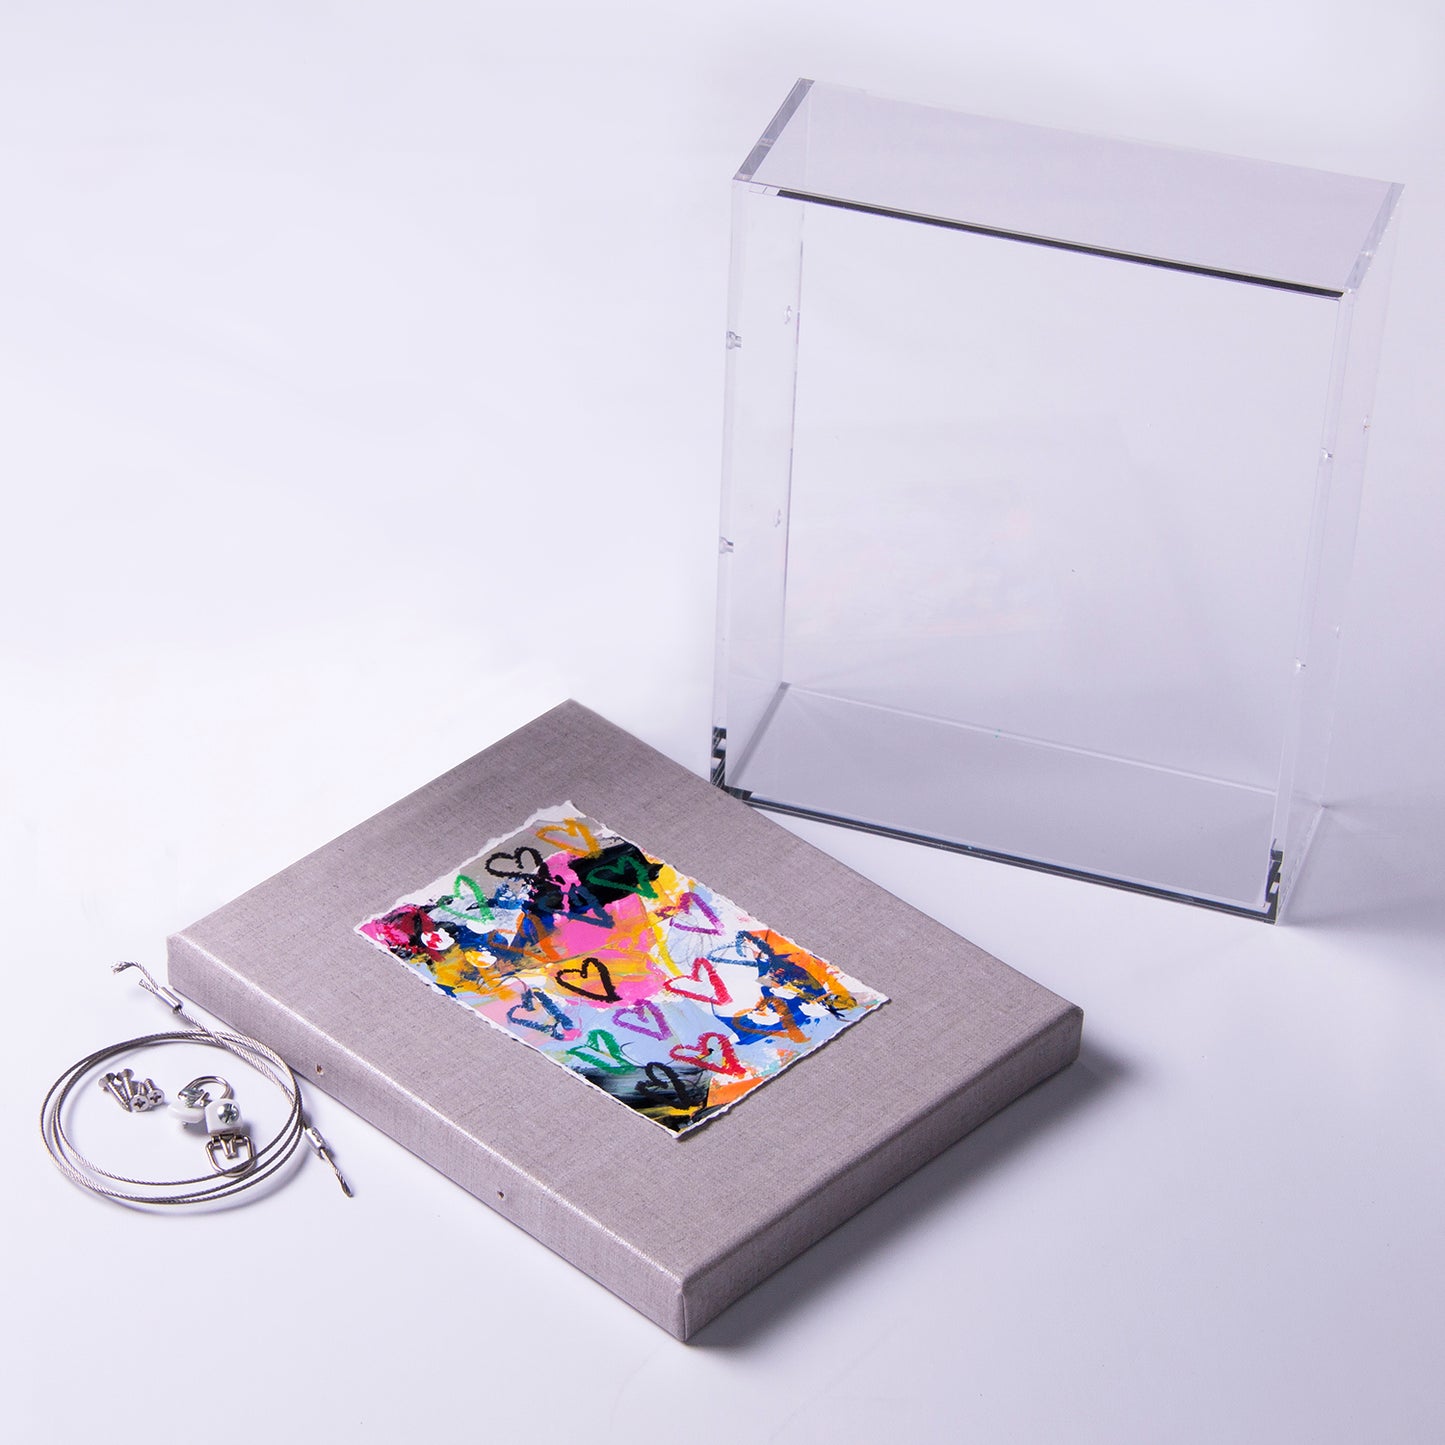 Case Pack of Shadowbox with Canvas - 3" Depth